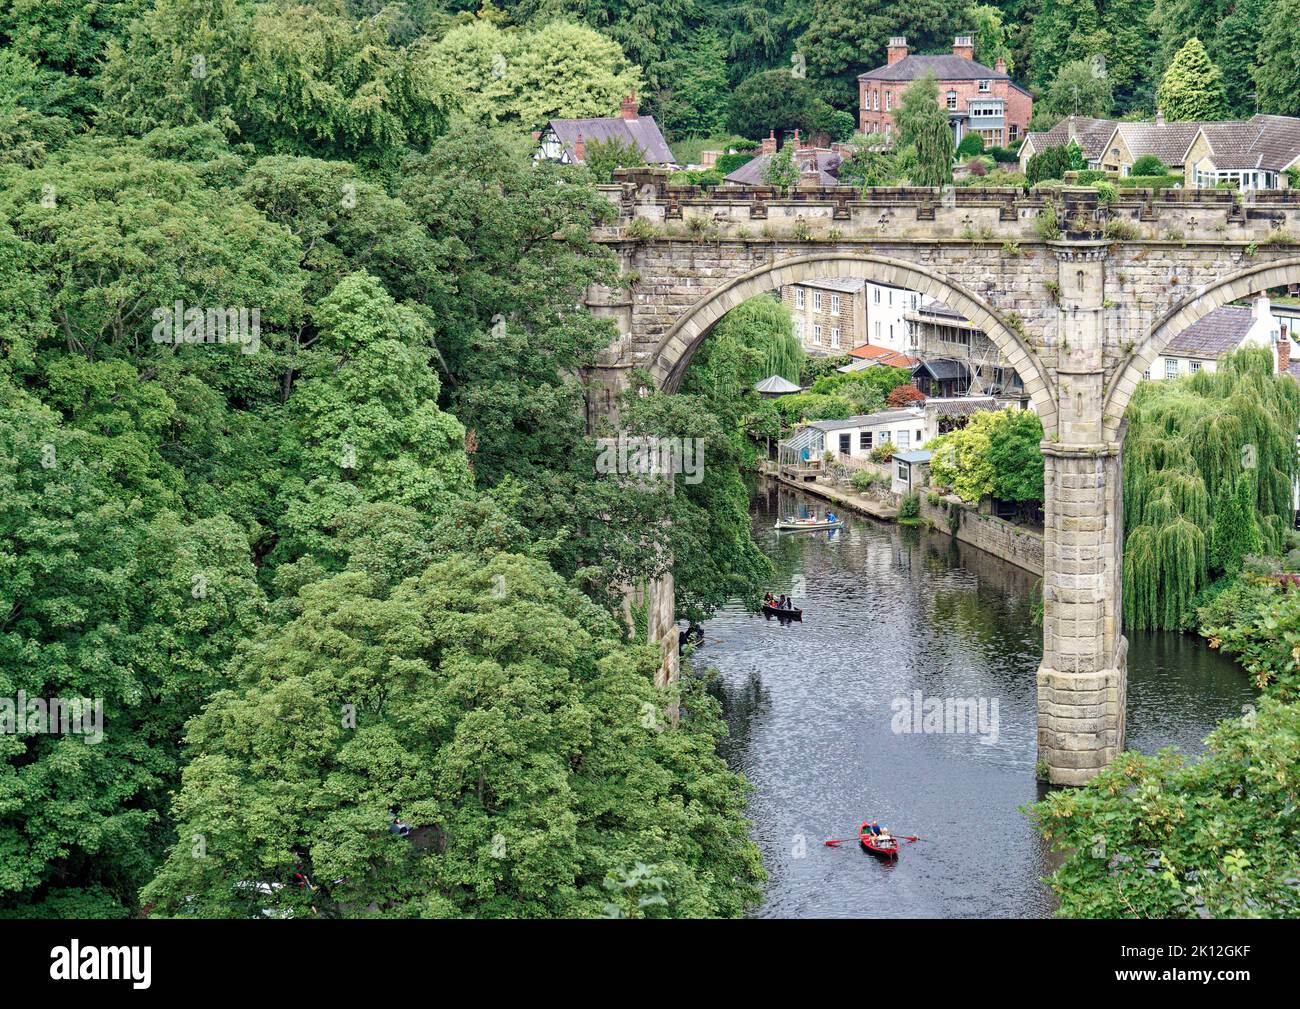 Knaresborough, North Yorkshire - View of the River Nidd and the iconic railway viaduct from the castle ramparts. Stock Photo